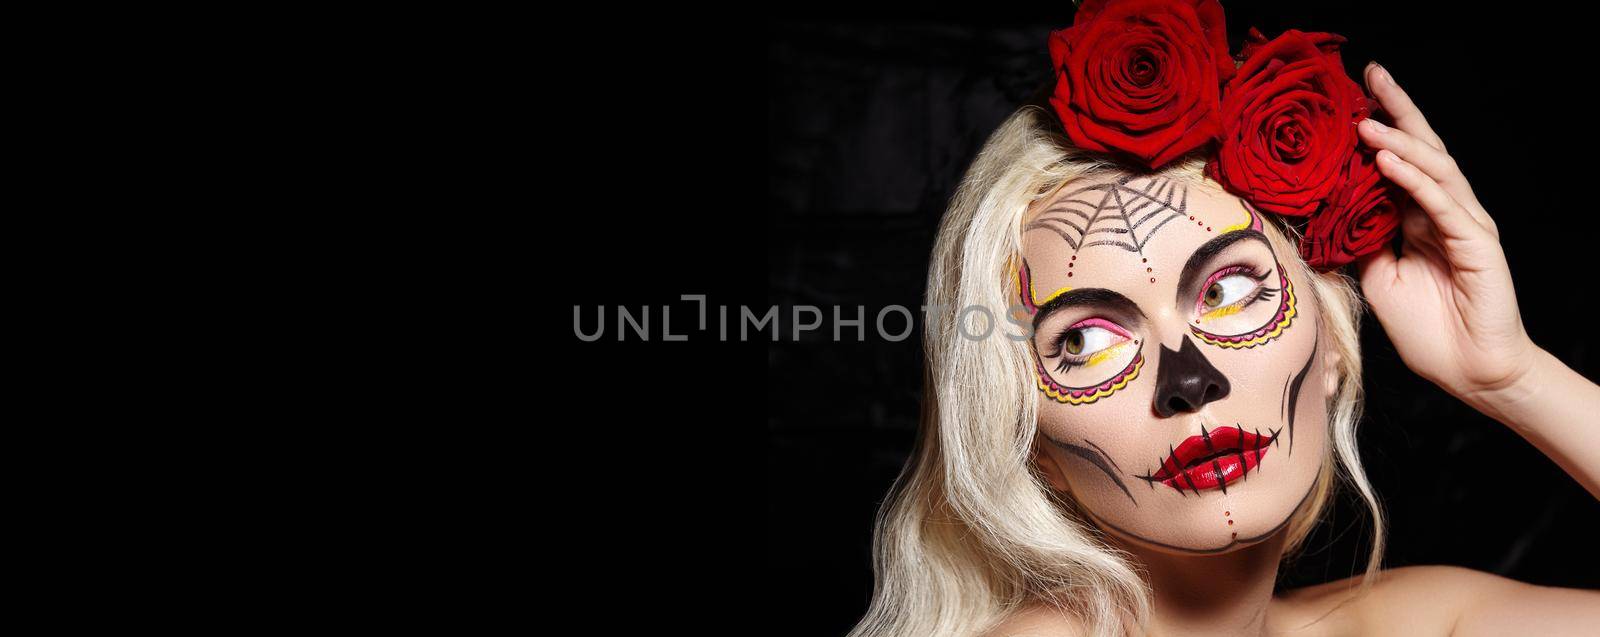 Halloween Make-Up Style. Blond Model Wear Sugar Skull Makeup with Red Roses. Dia de los Muertos or Santa Muerte concept by MarinaFrost